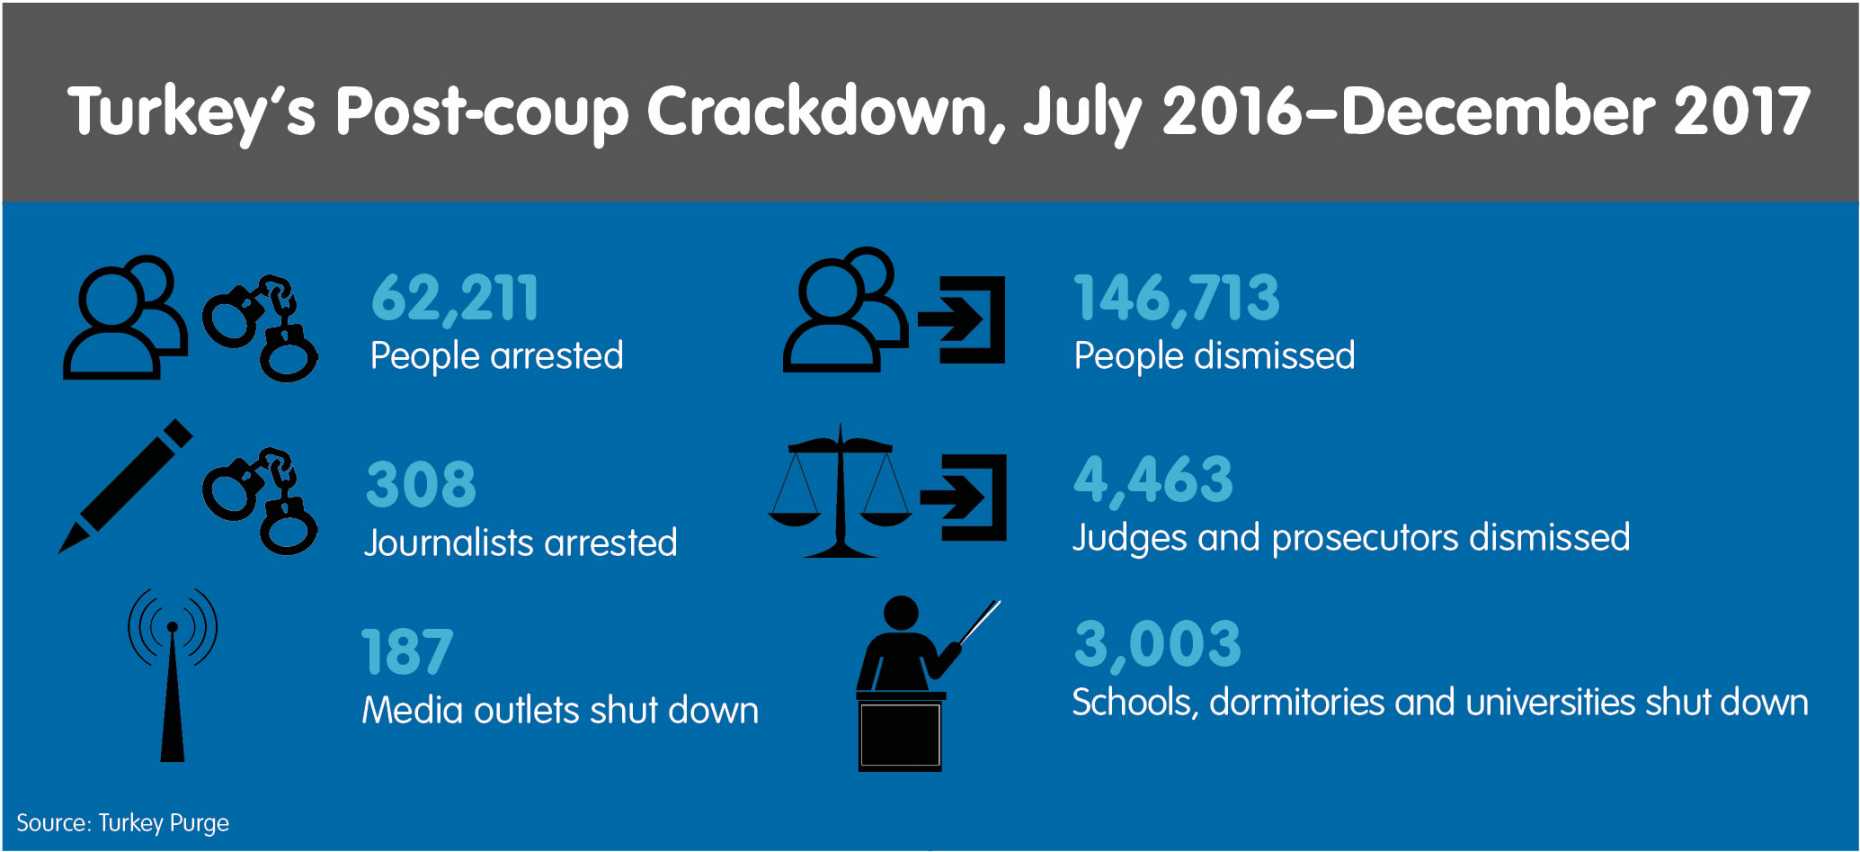 Turkey's post-coup crackdown